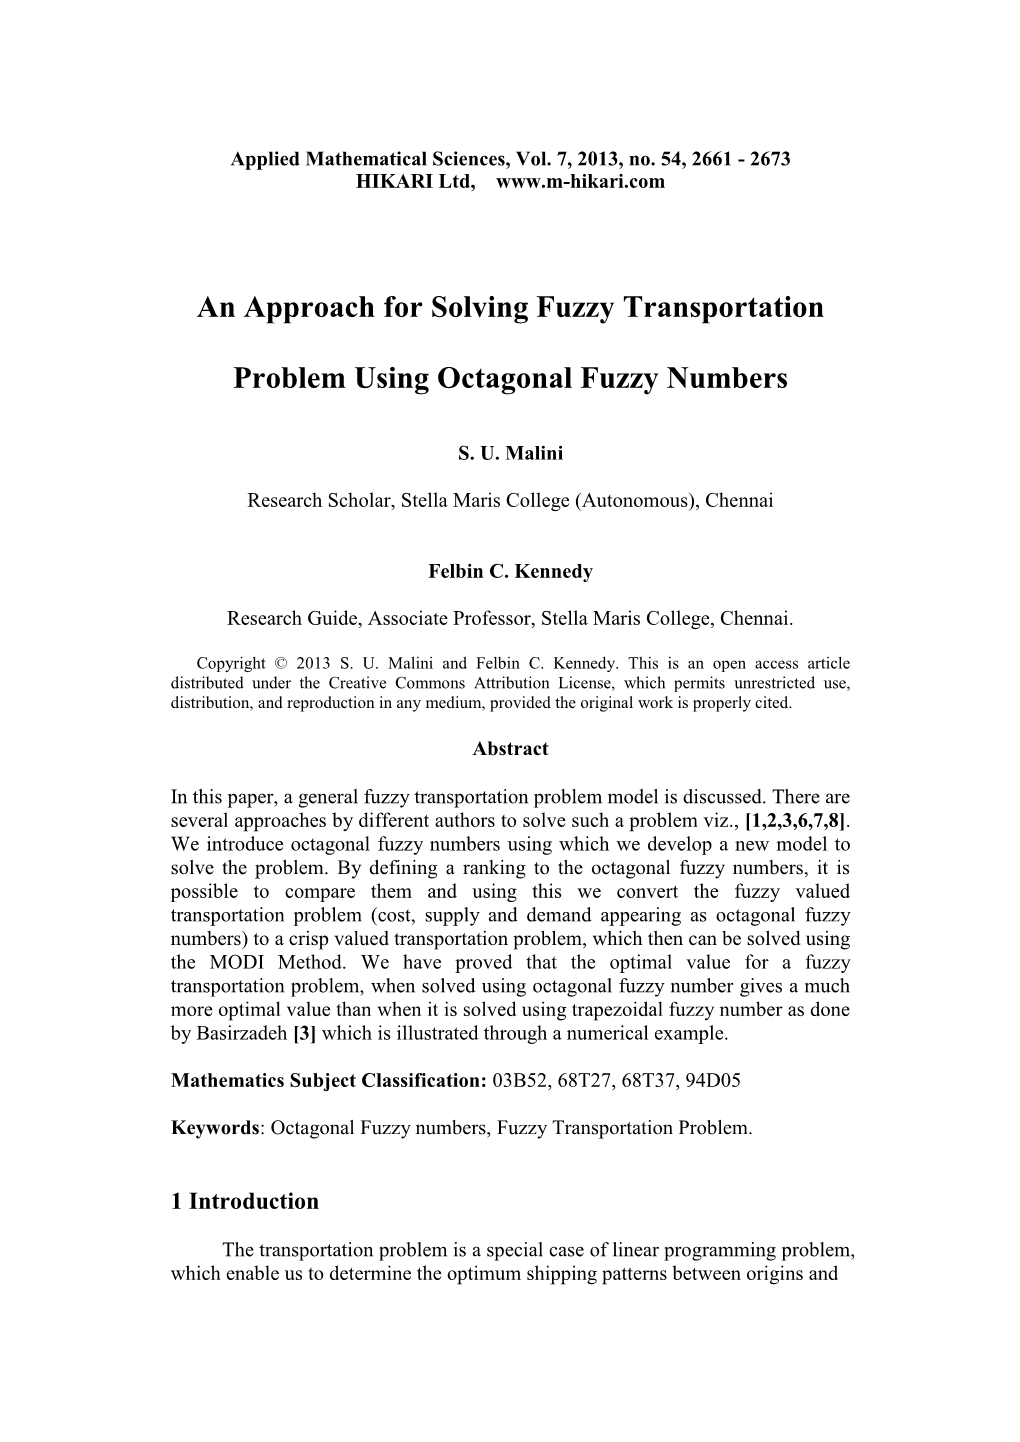 An Approach for Solving Fuzzy Transportation Problem Using